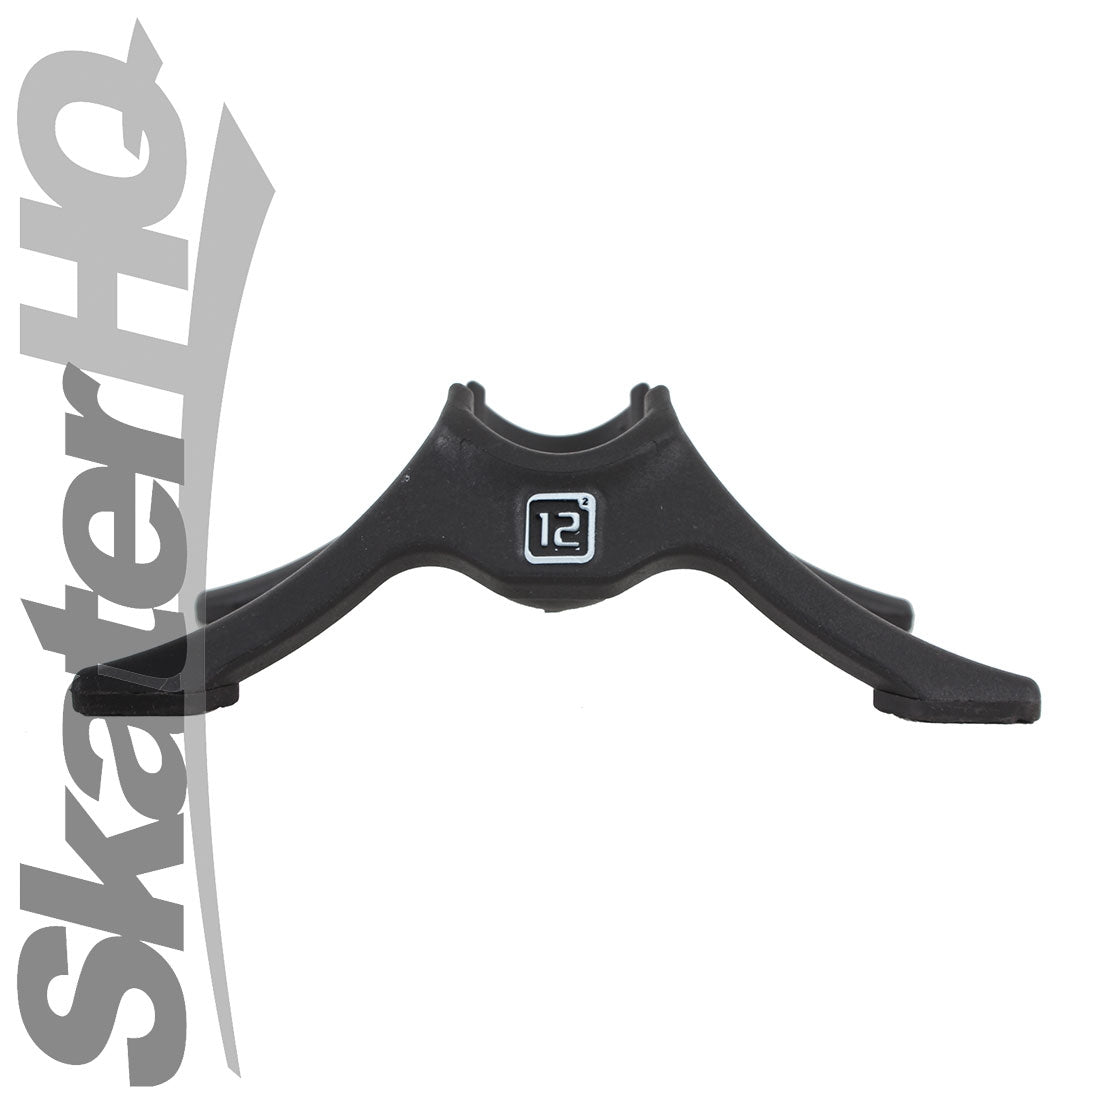 Ethic Scooter XL 30mm Stand - Black Scooter Hardware and Parts